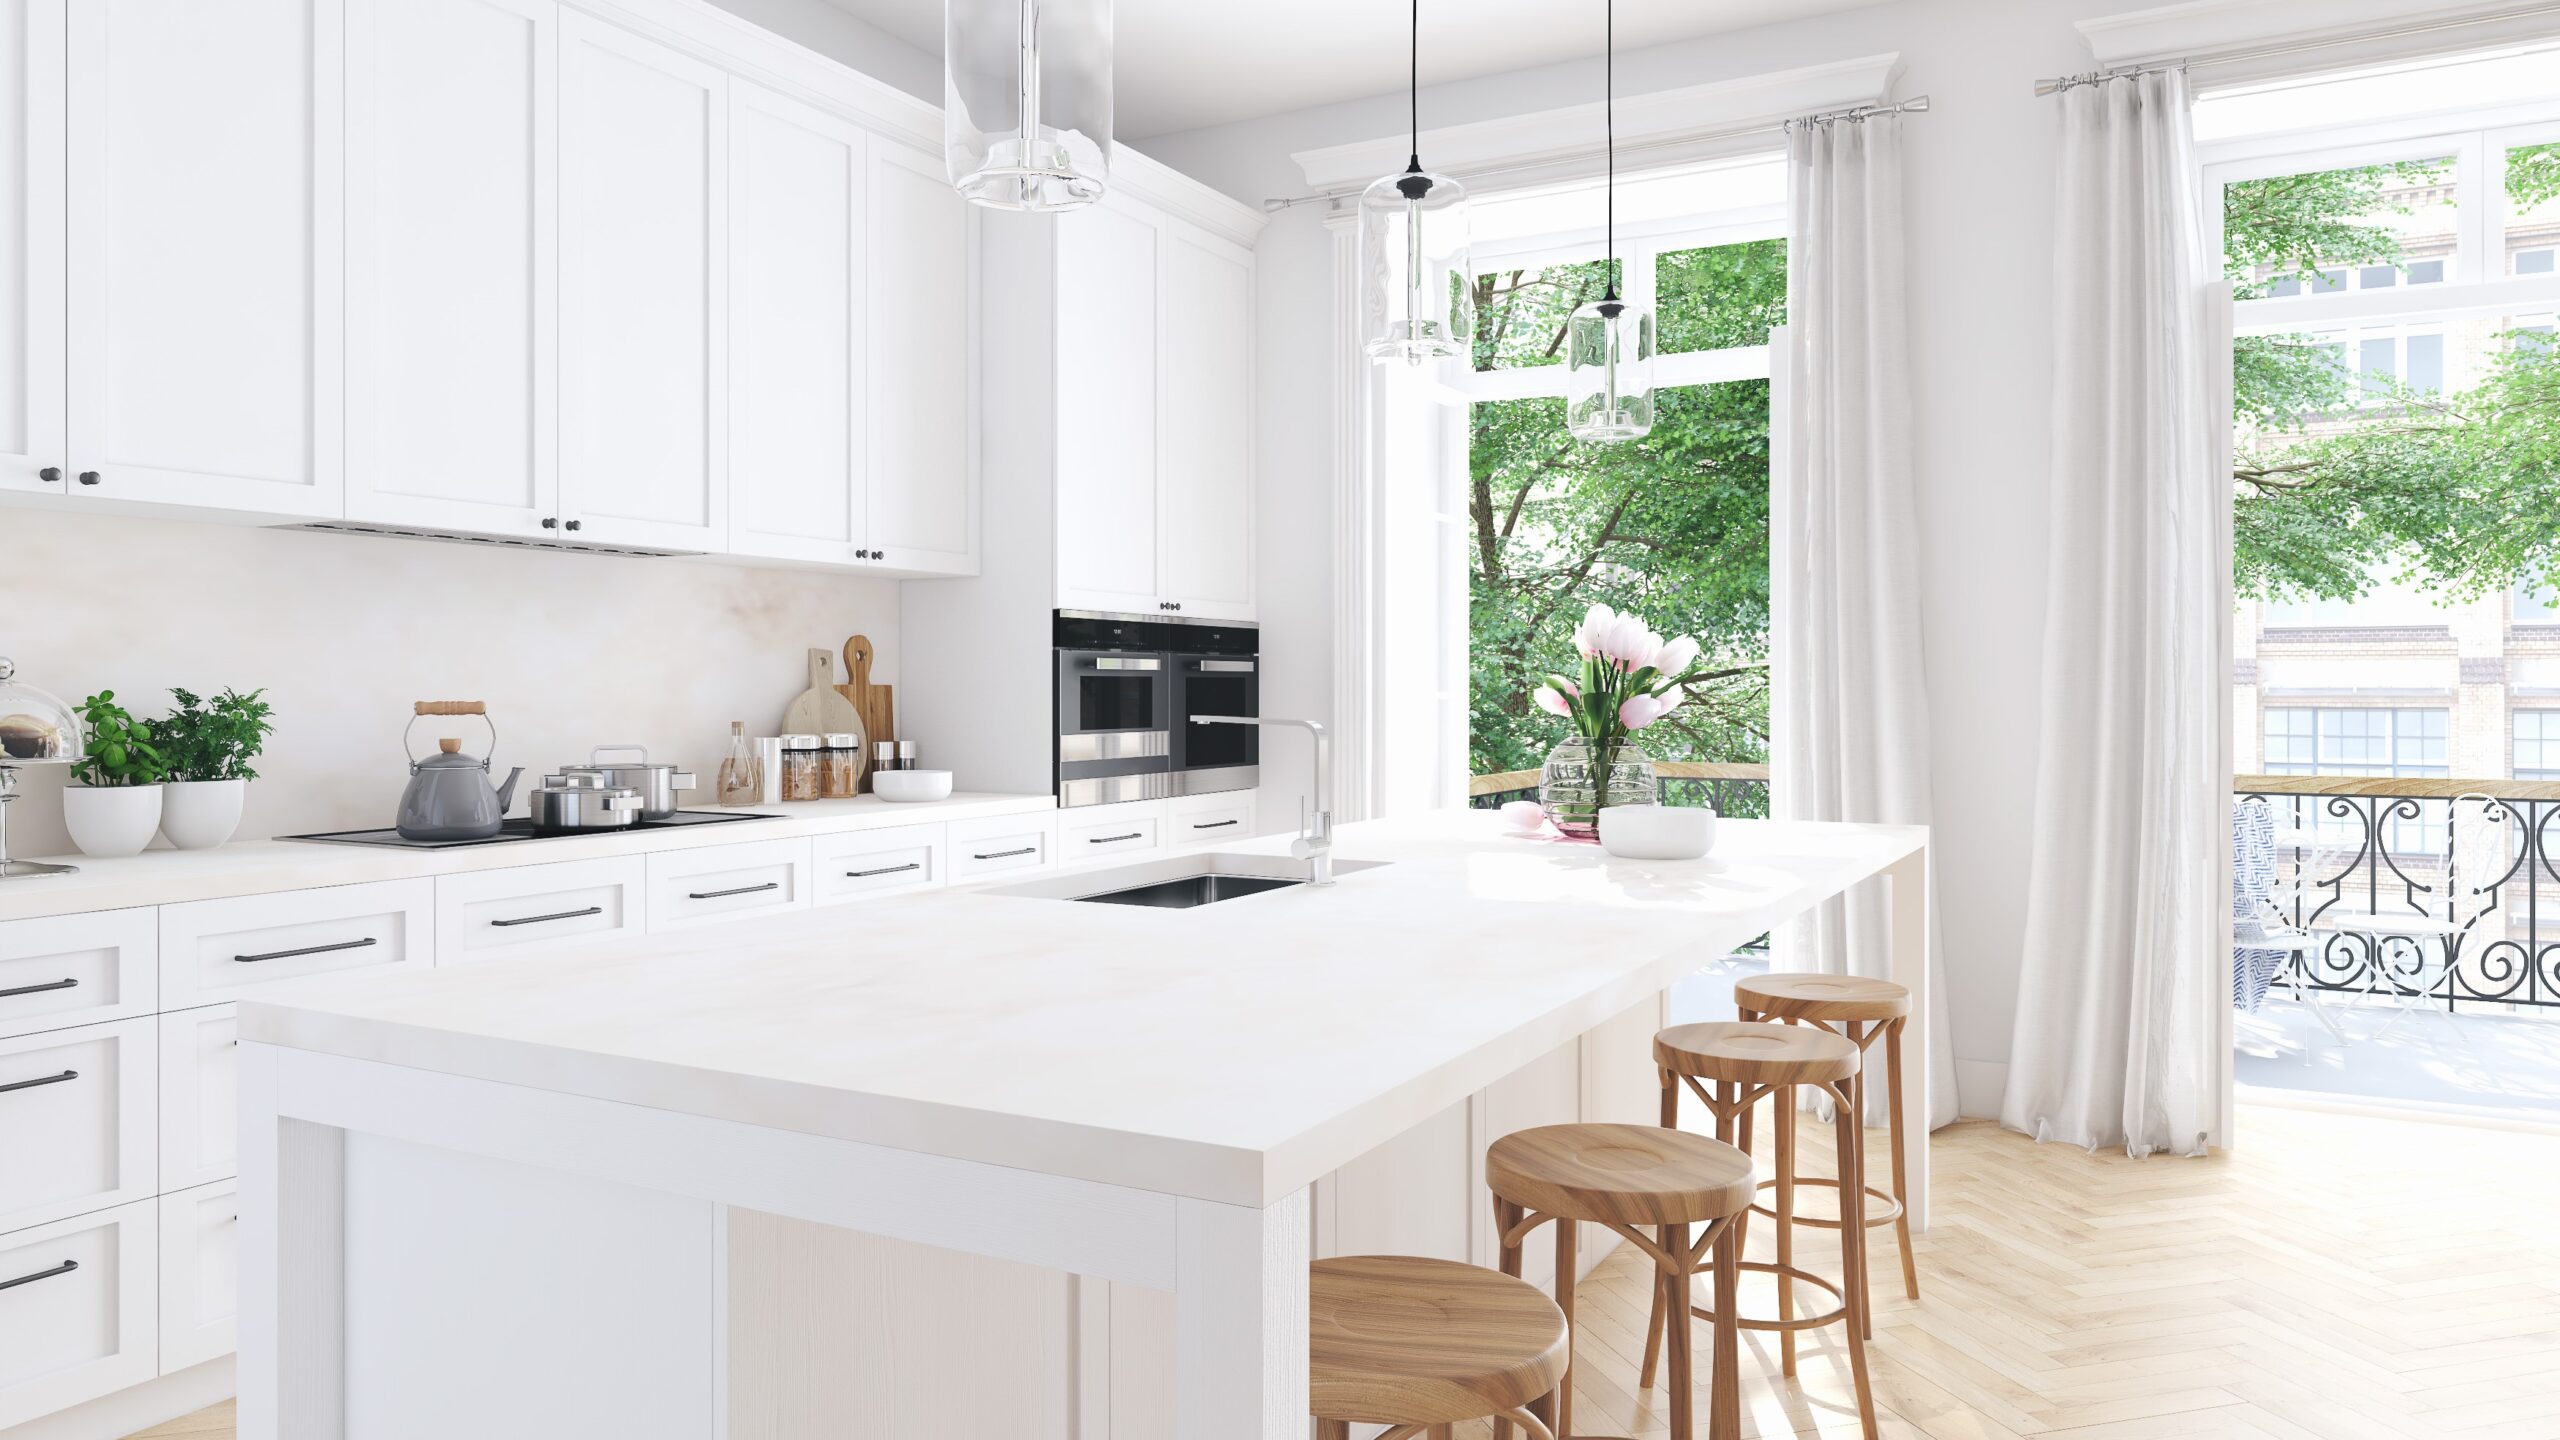 Bright, relaxing kitchen style with white cabinets and countertop